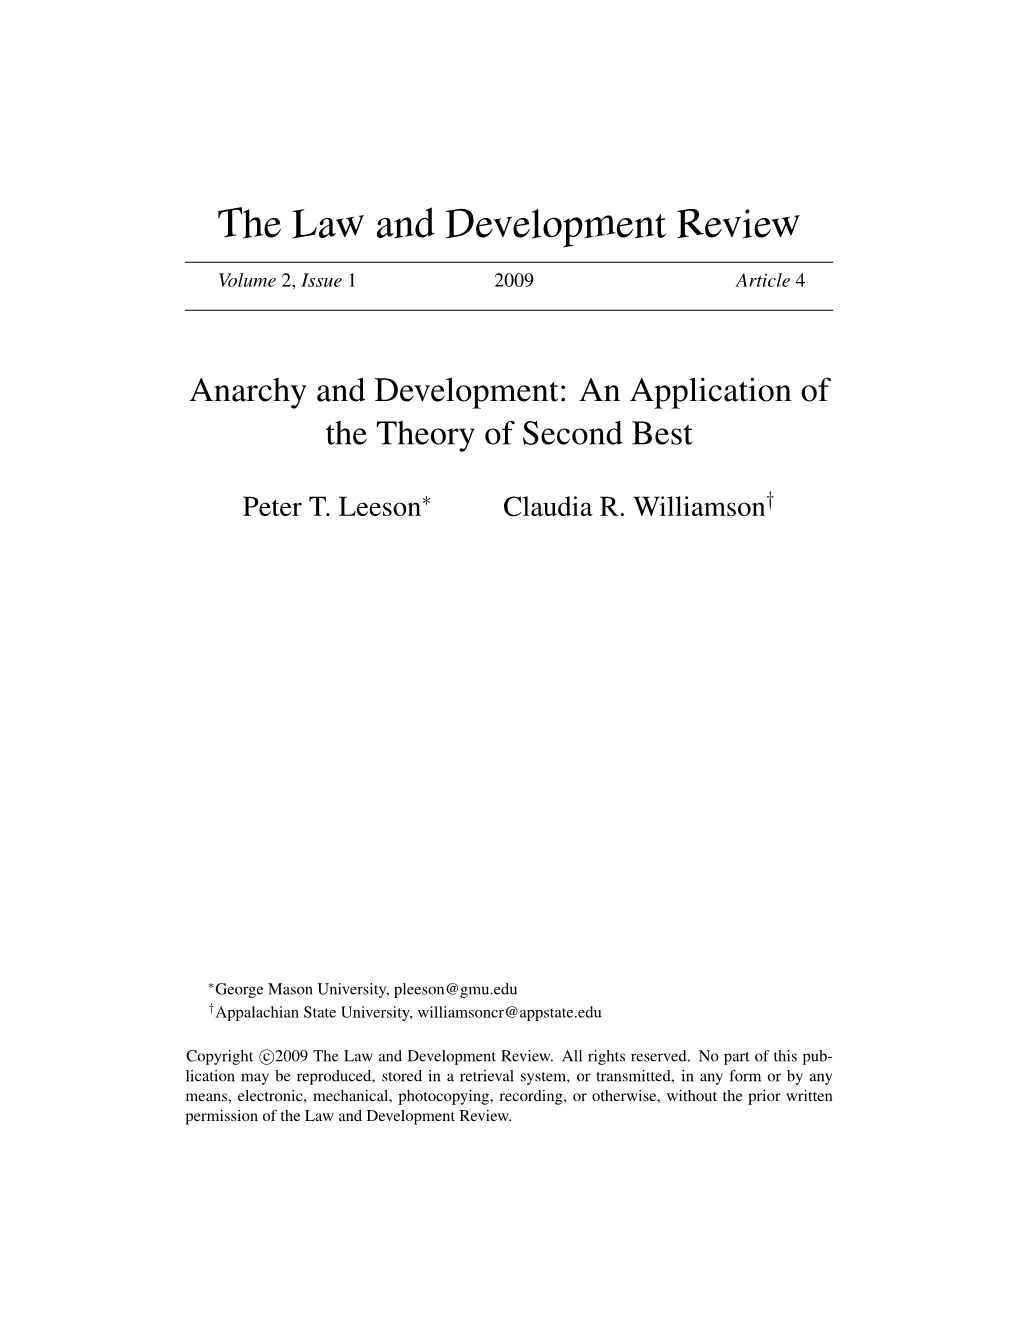 Anarchy and Development: an Application of the Theory of Second Best